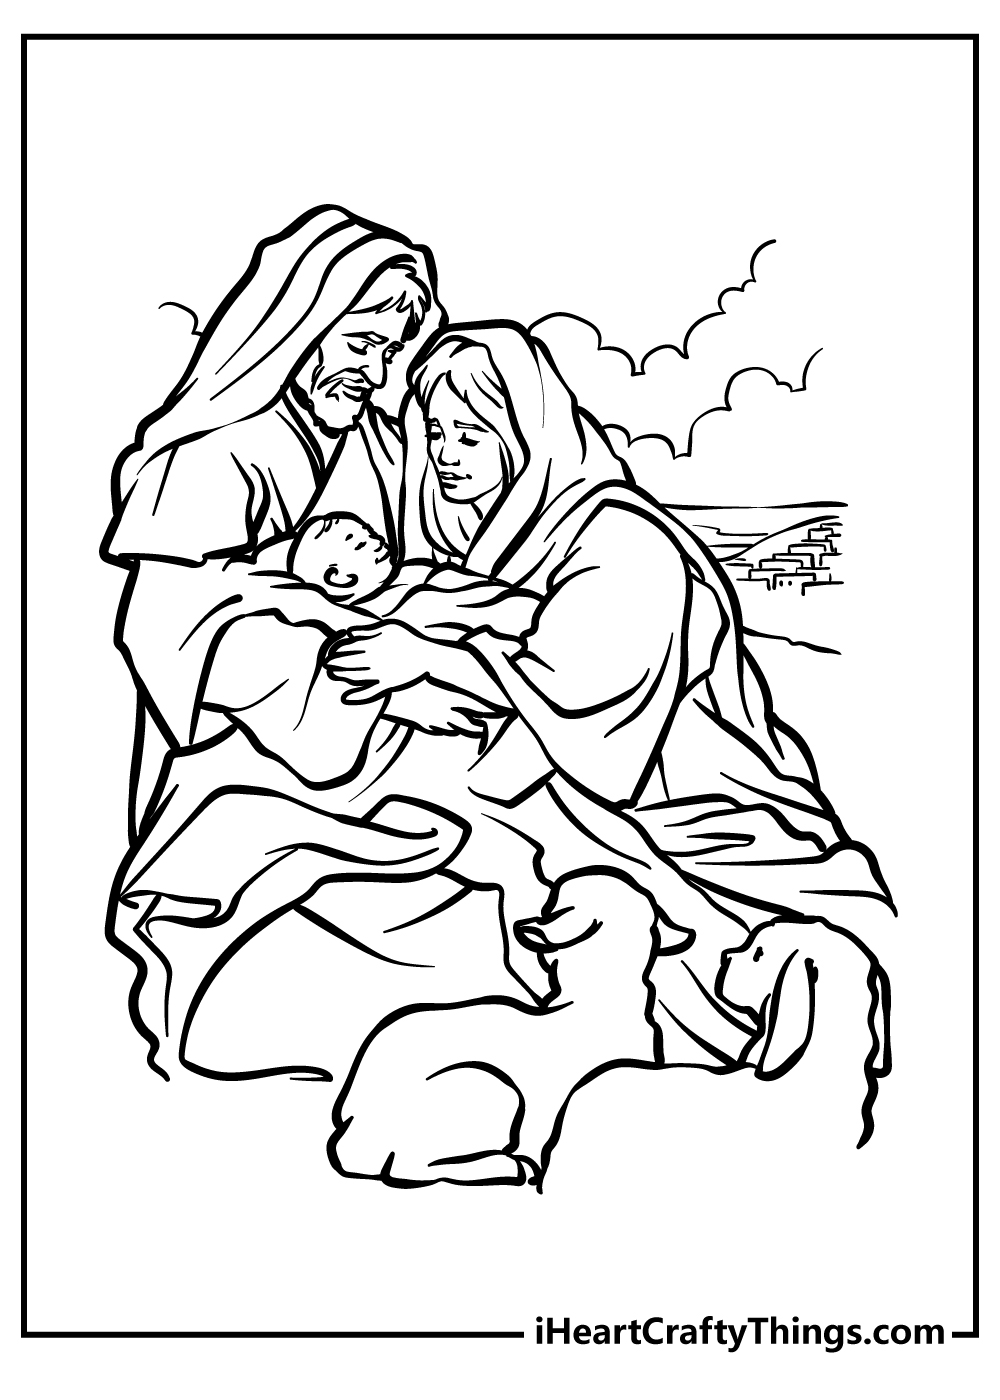 Nativity Coloring Book for kids free printable